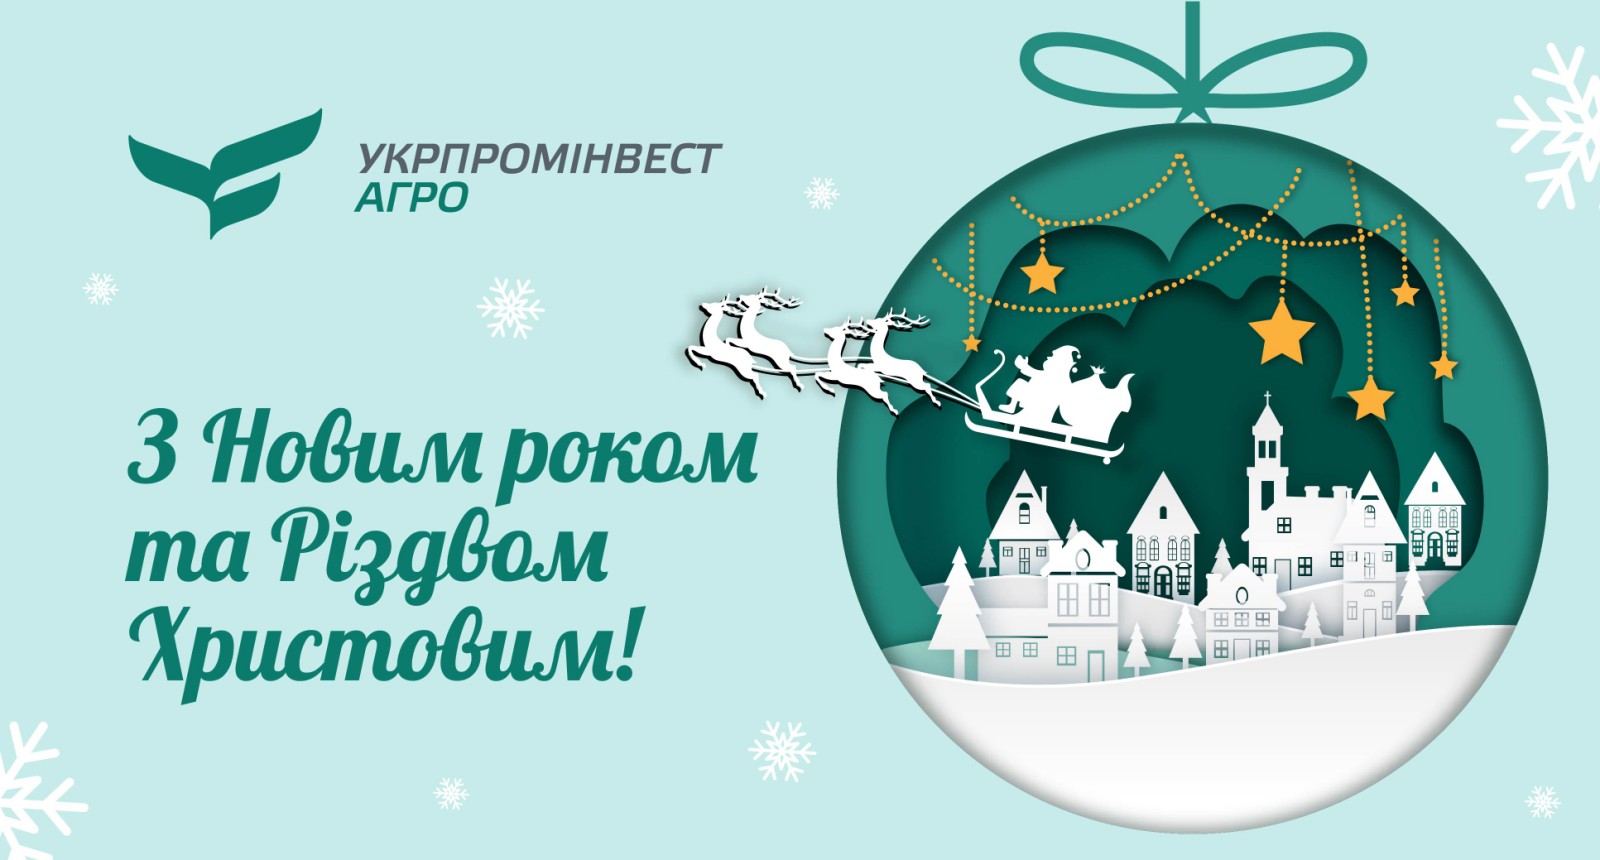 UKRPROMINVEST-AGRO wishes a Merry Christmas and a Happy New Year!